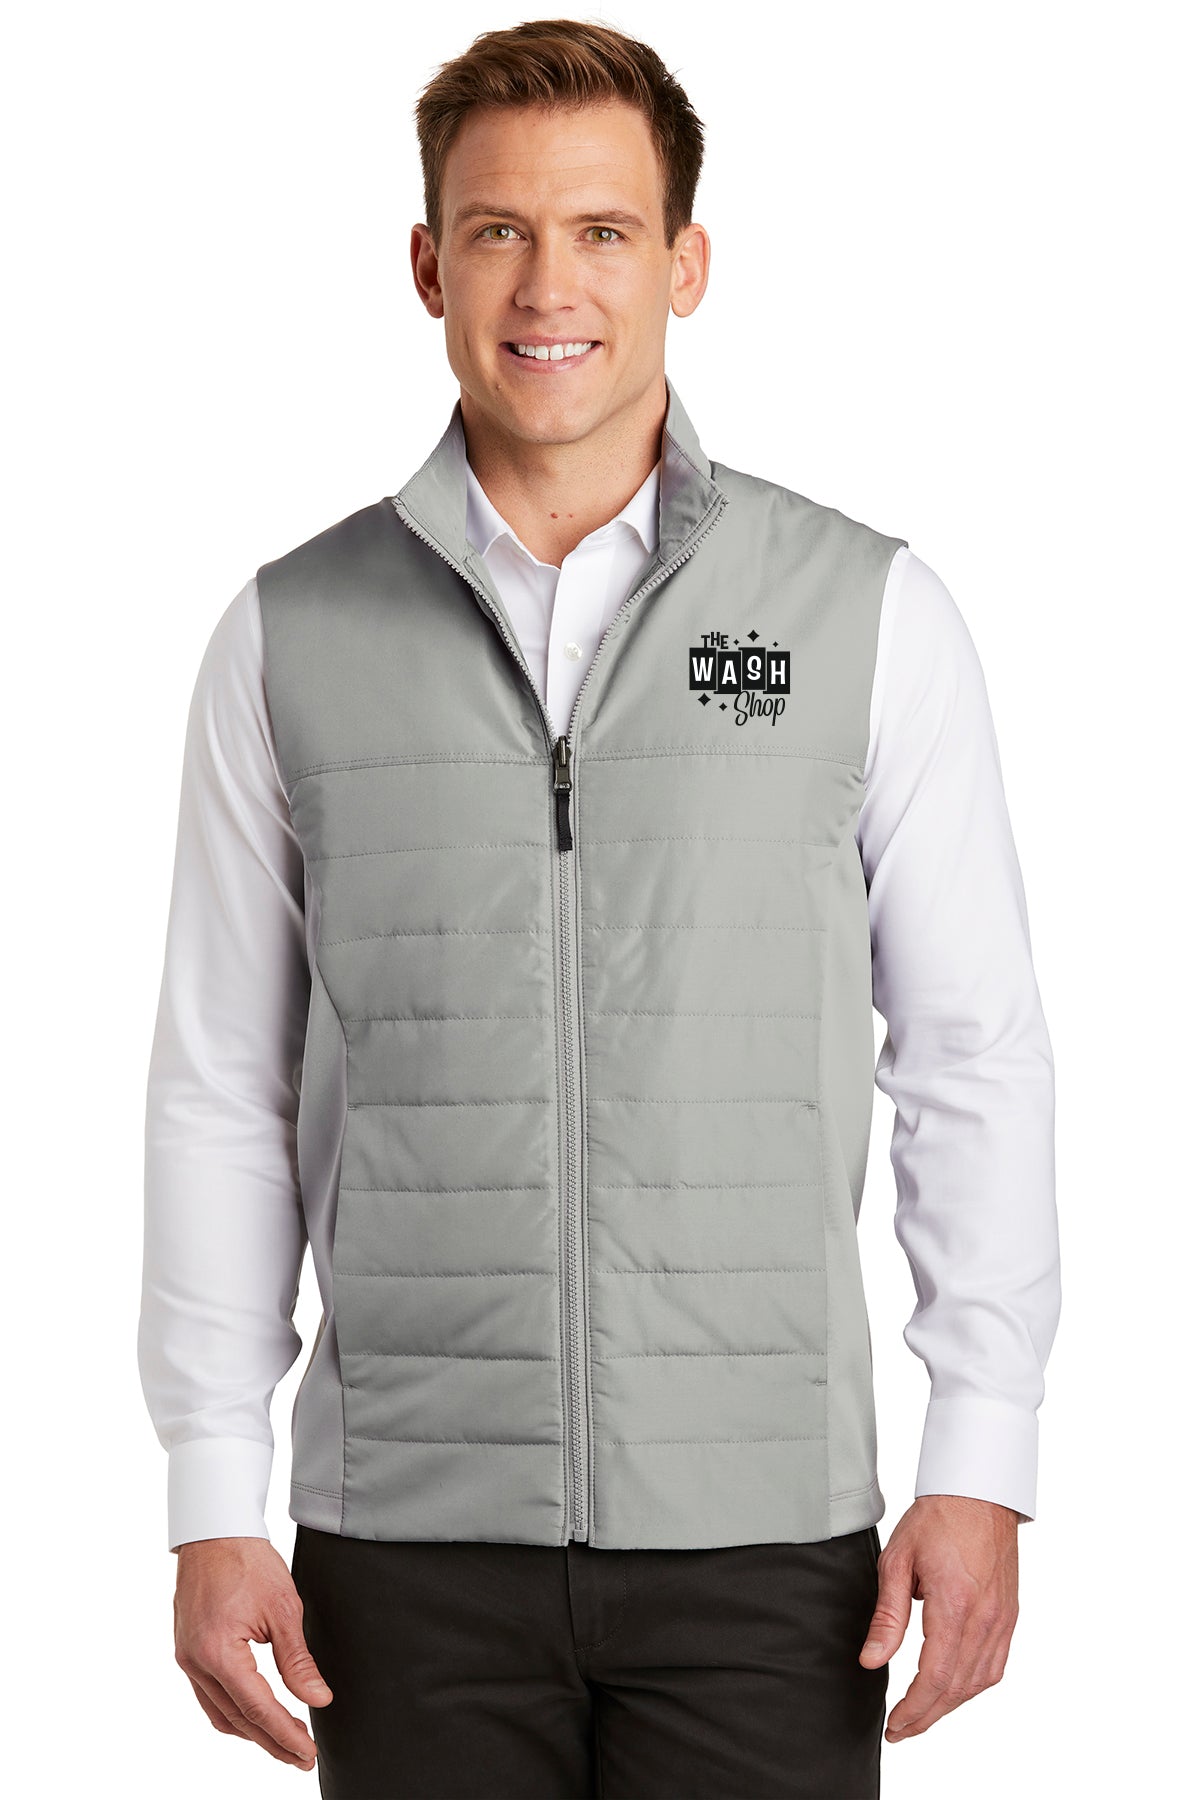 Men's Collective Insulated Vest - The Wash Shop